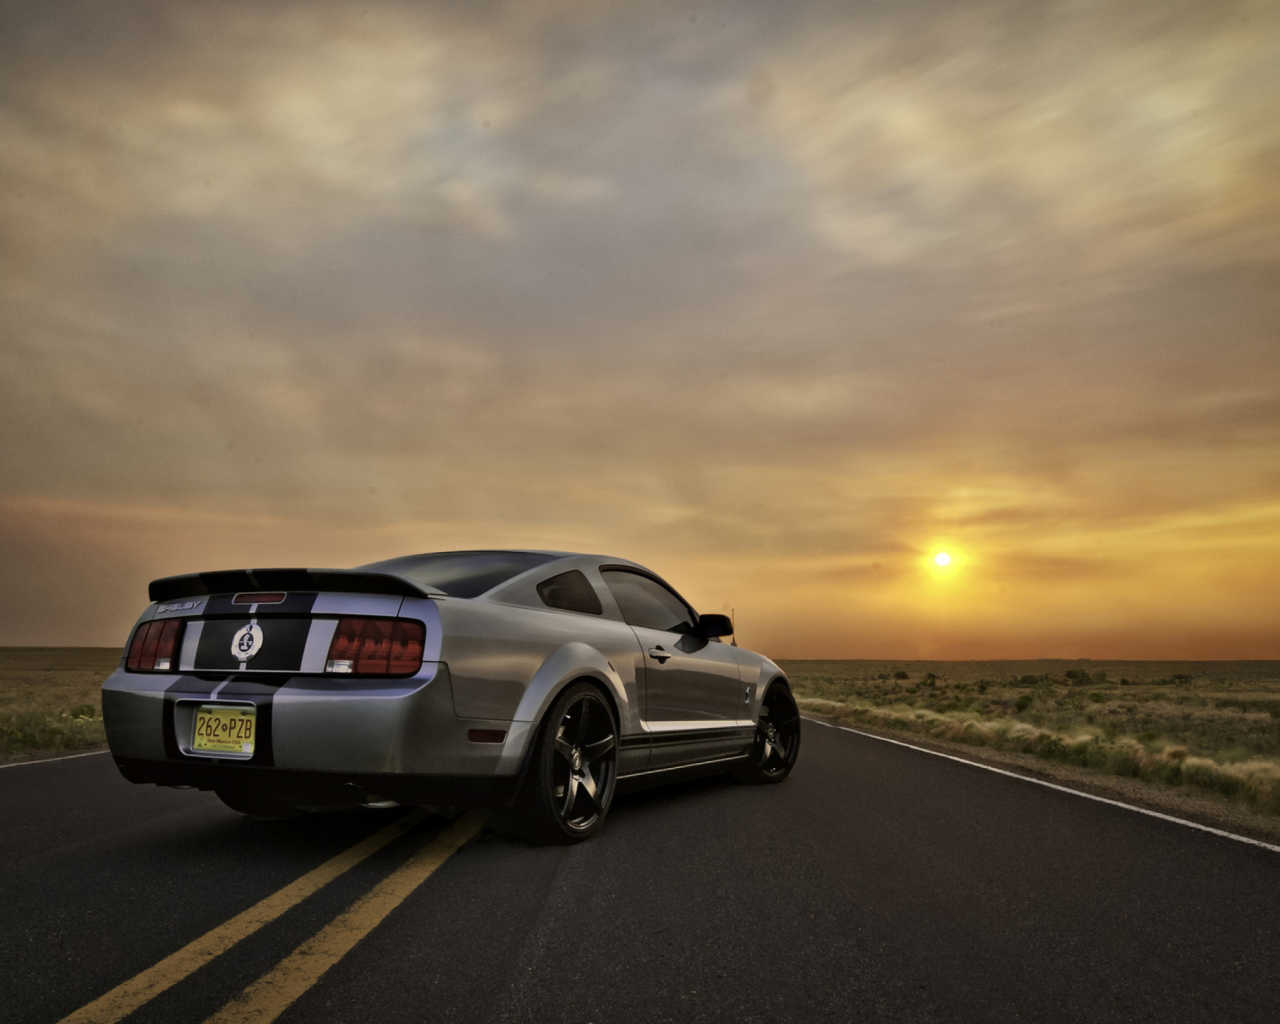 Das Ford Mustang Shelby GT500 Wallpaper 1280x1024